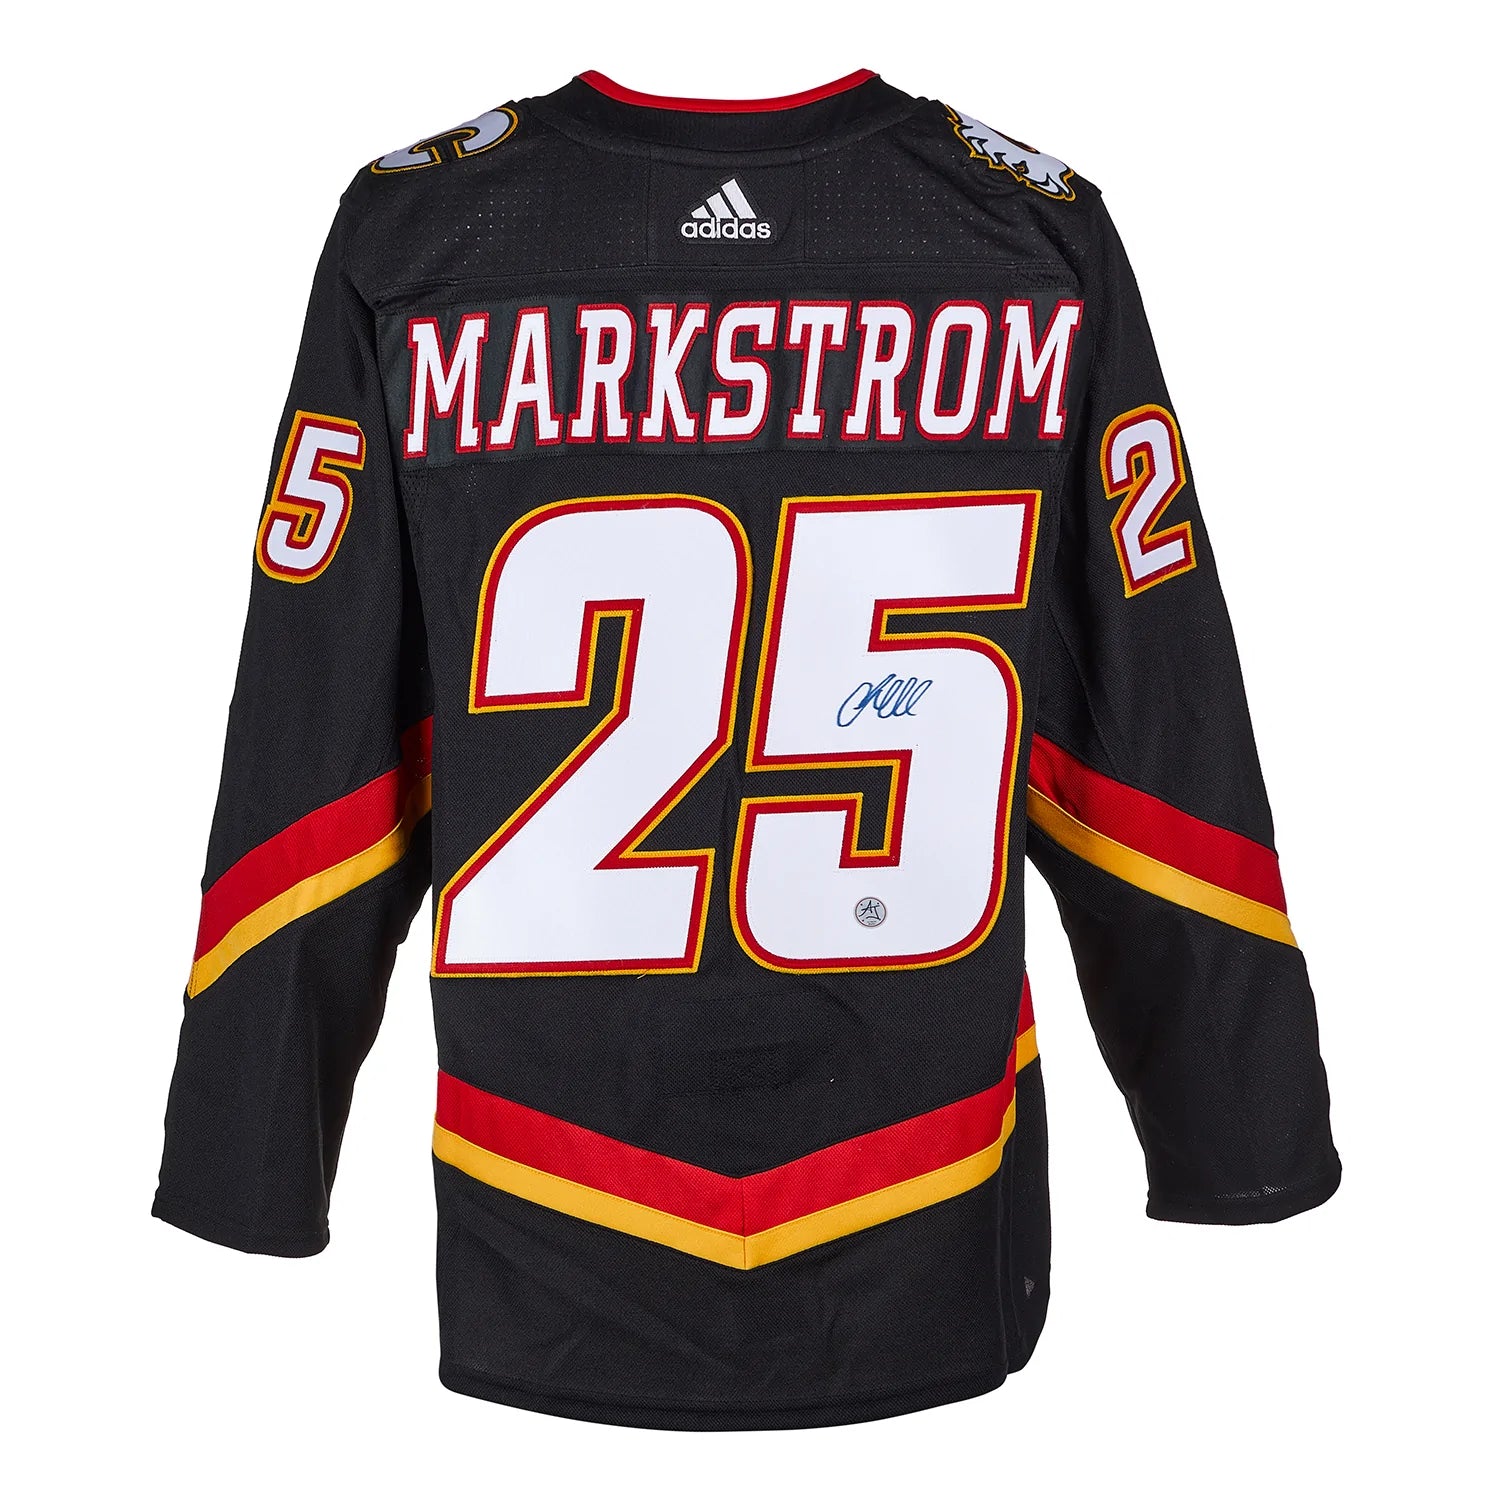 Jacob Markstrom Signed Vancouver Canucks Adidas Pro Jersey (east